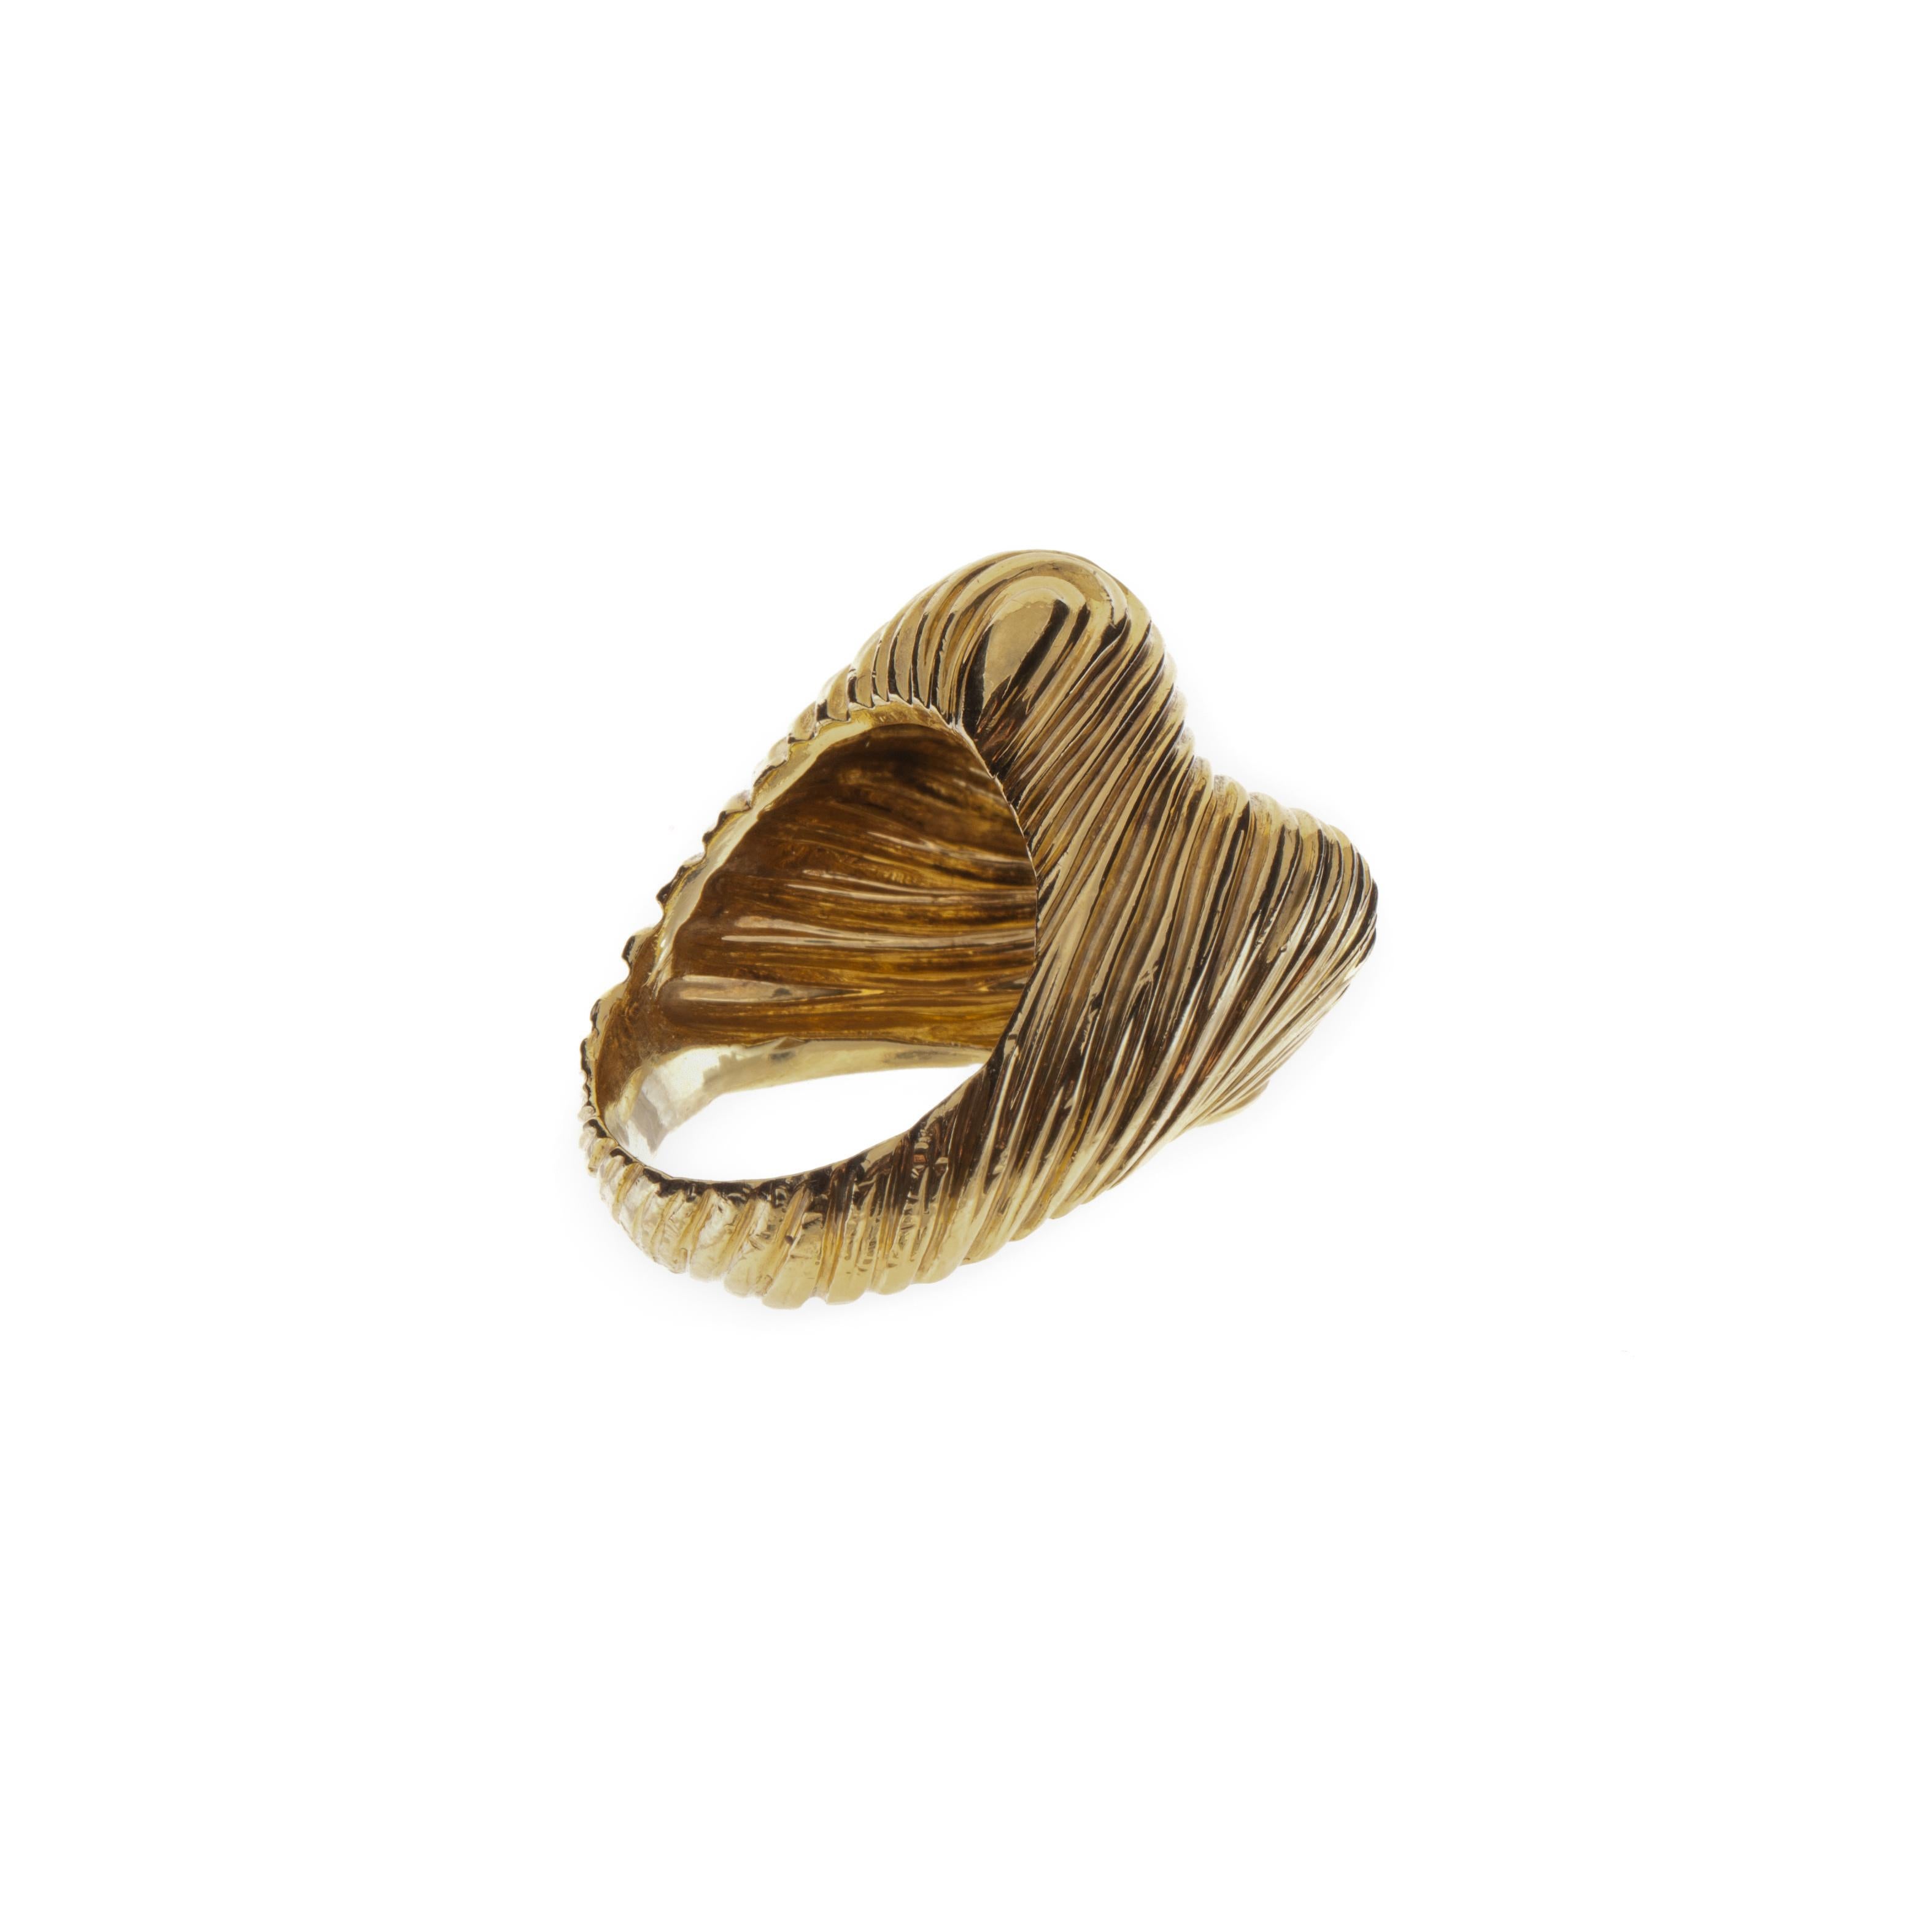 Henry Dunay ring in 18K yellow gold with a ribbed dome design.  Presentation area is 7/8 inch by 7/8 inch and it stands 5/8 inch off the finger.  The ring is a size 5 1/2.